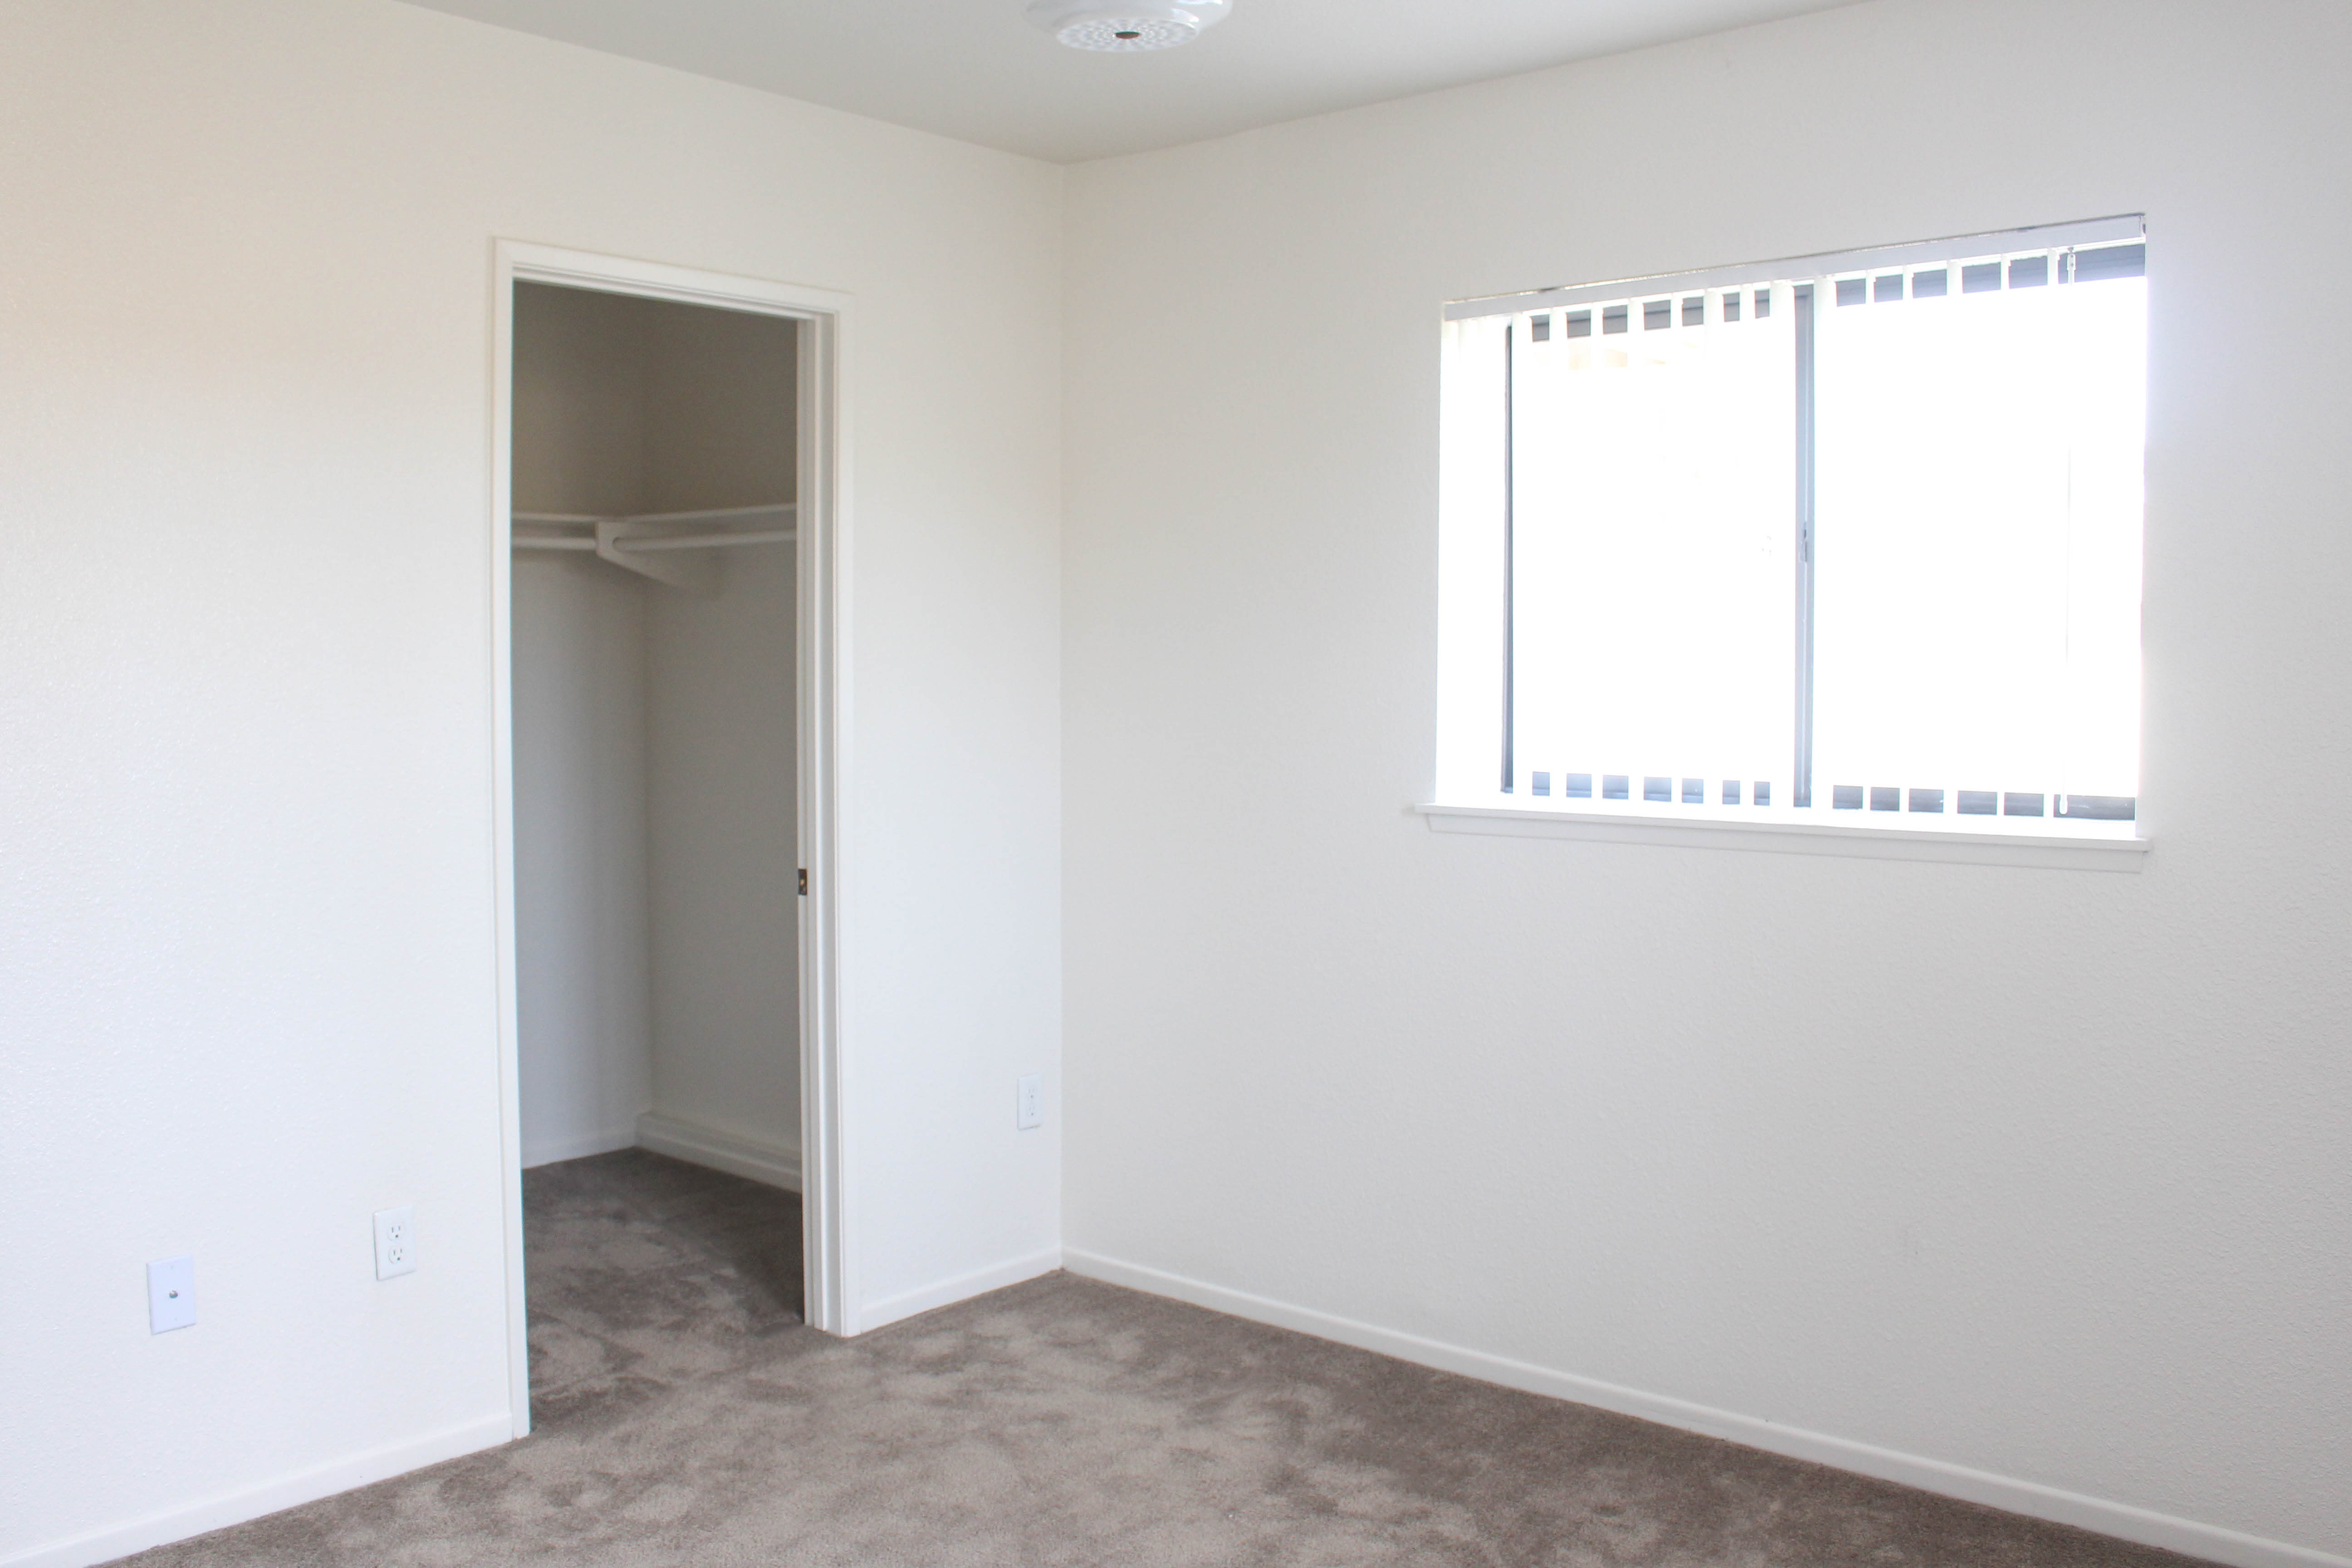 A bedroom with a walk-in closet at Miramar Townhomes in San Diego, California